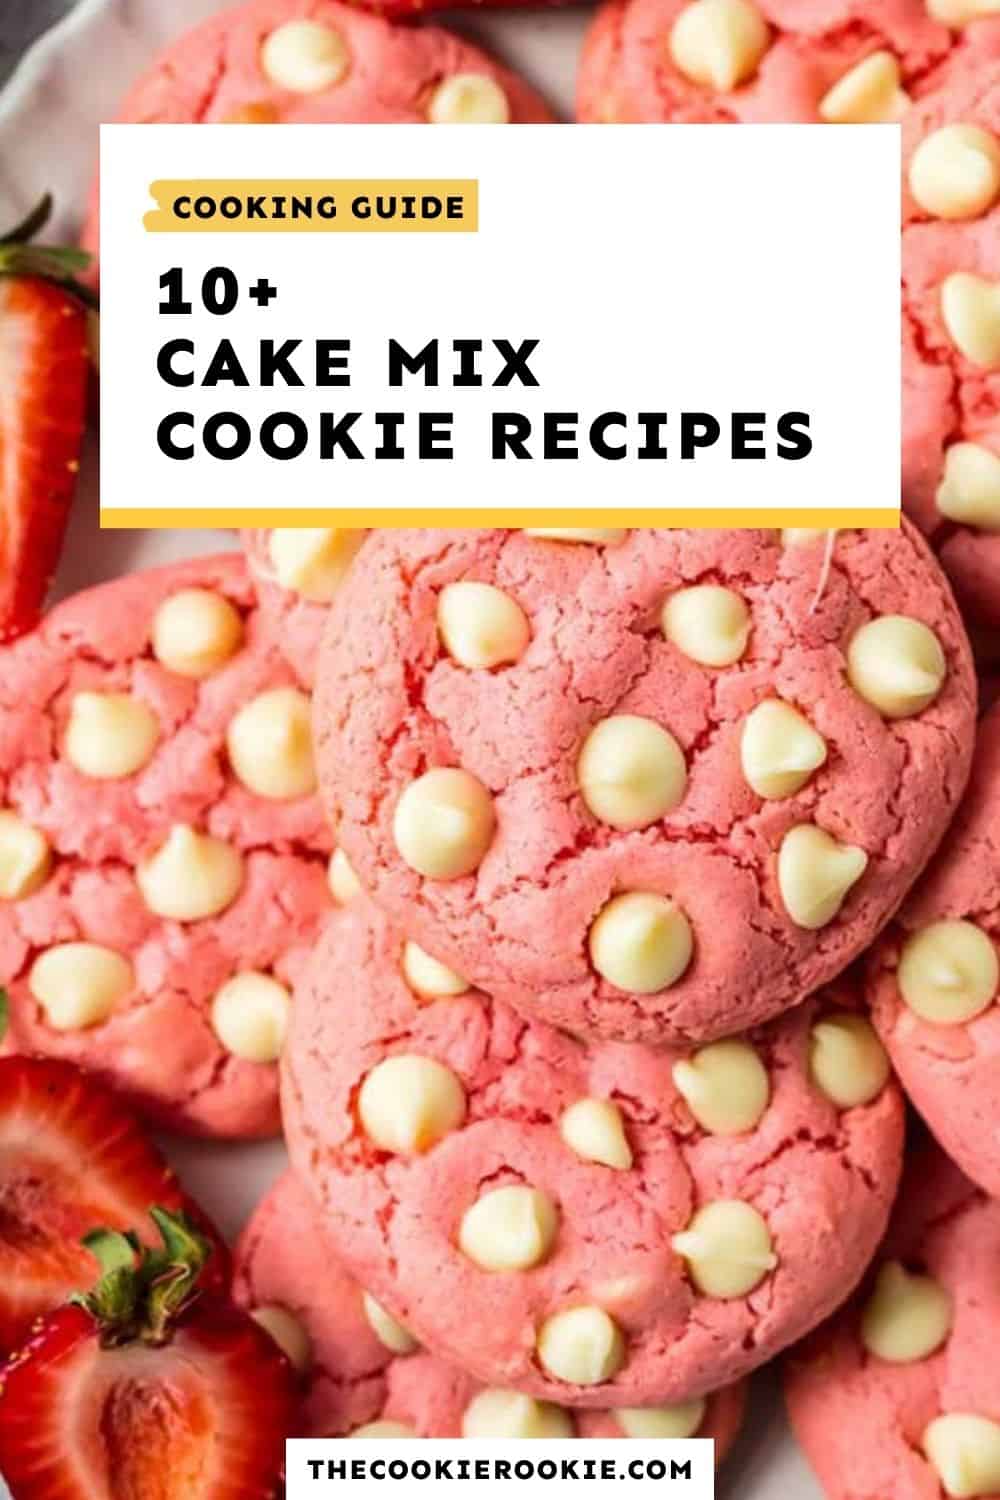 cake mix cookies recipes guide